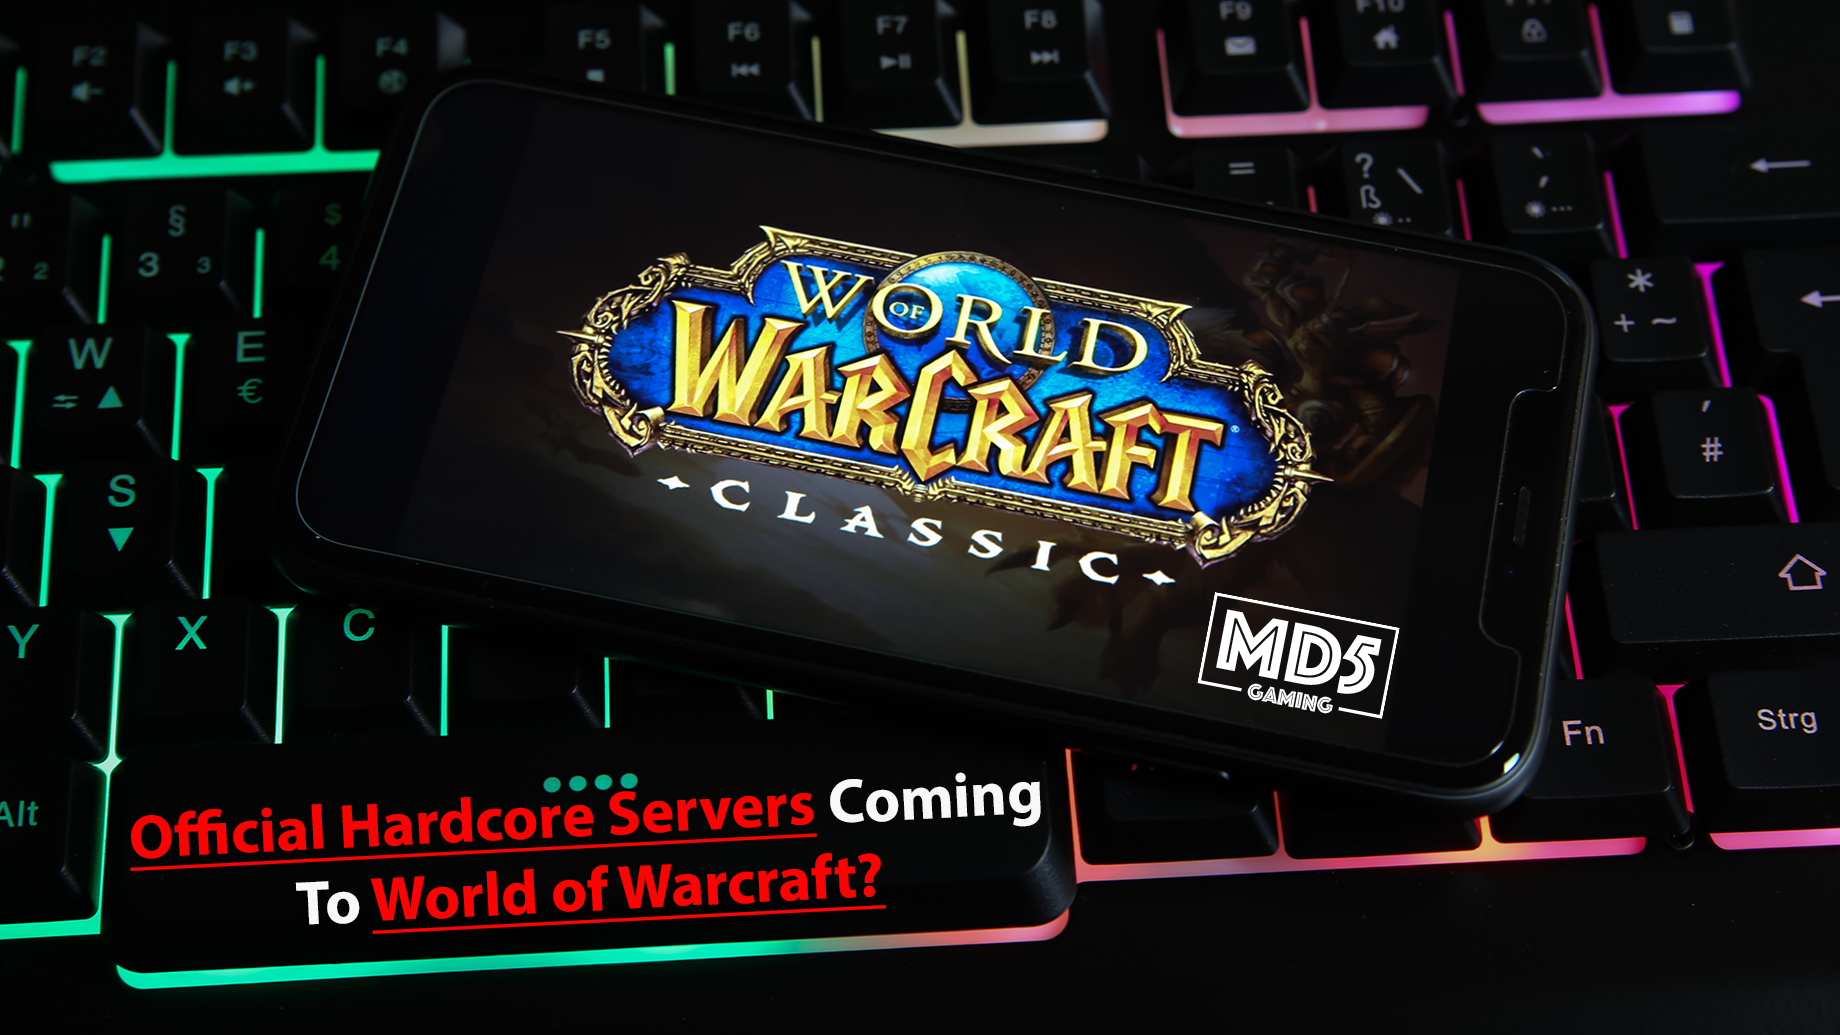 Are Hardcore Servers Coming To World of Warcraft Classic